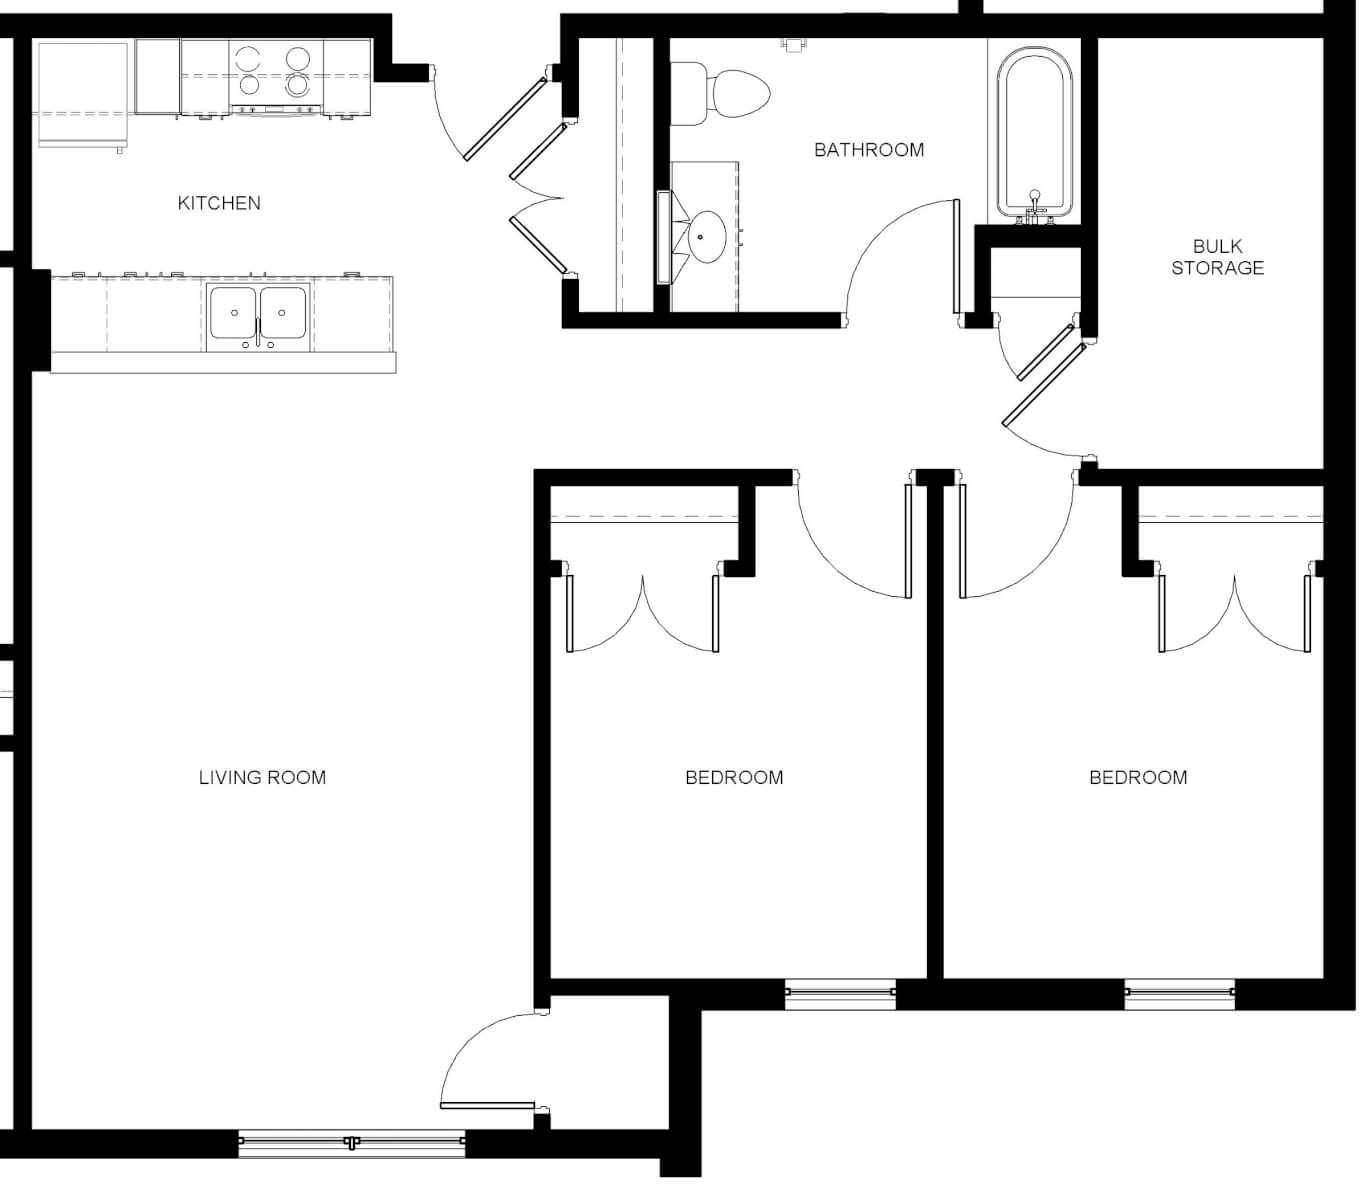 Two-bedroom unit